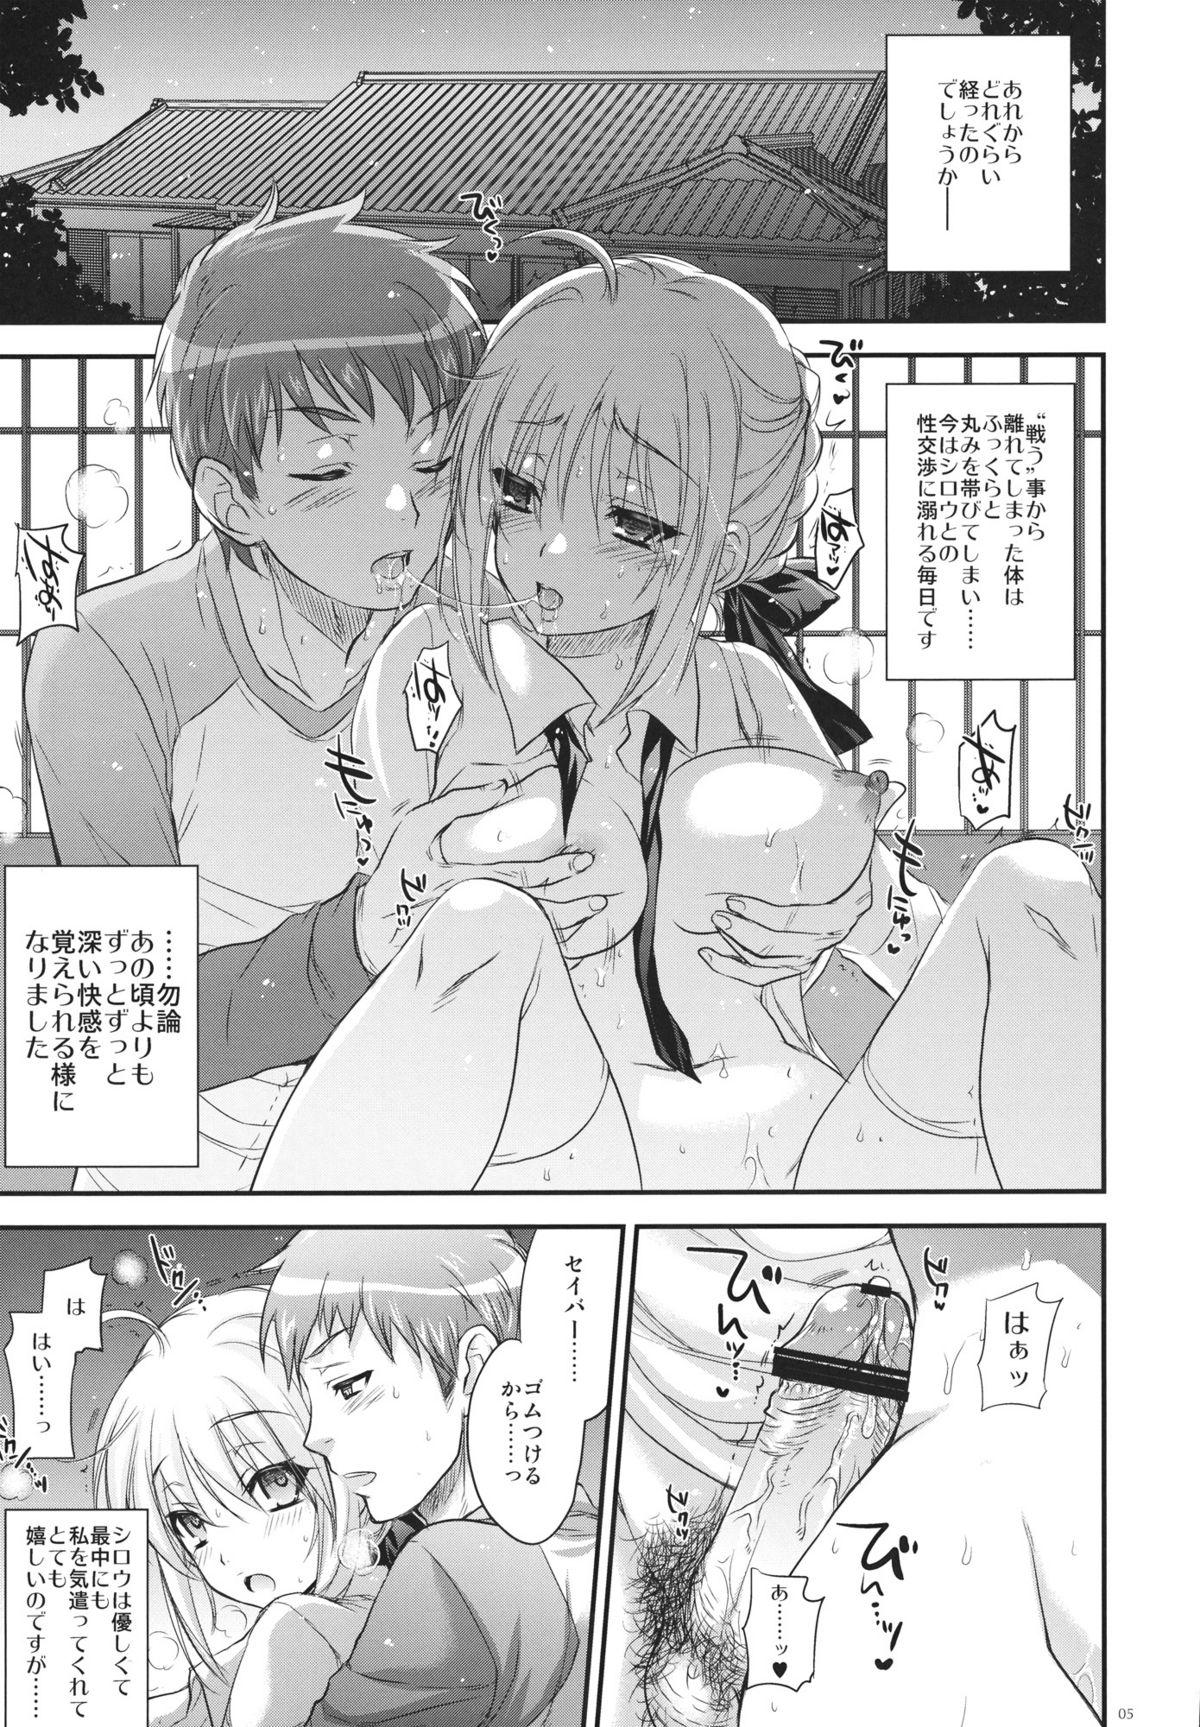 Gays GARIGARI 38 - Fate stay night Amateur Teen - Page 4